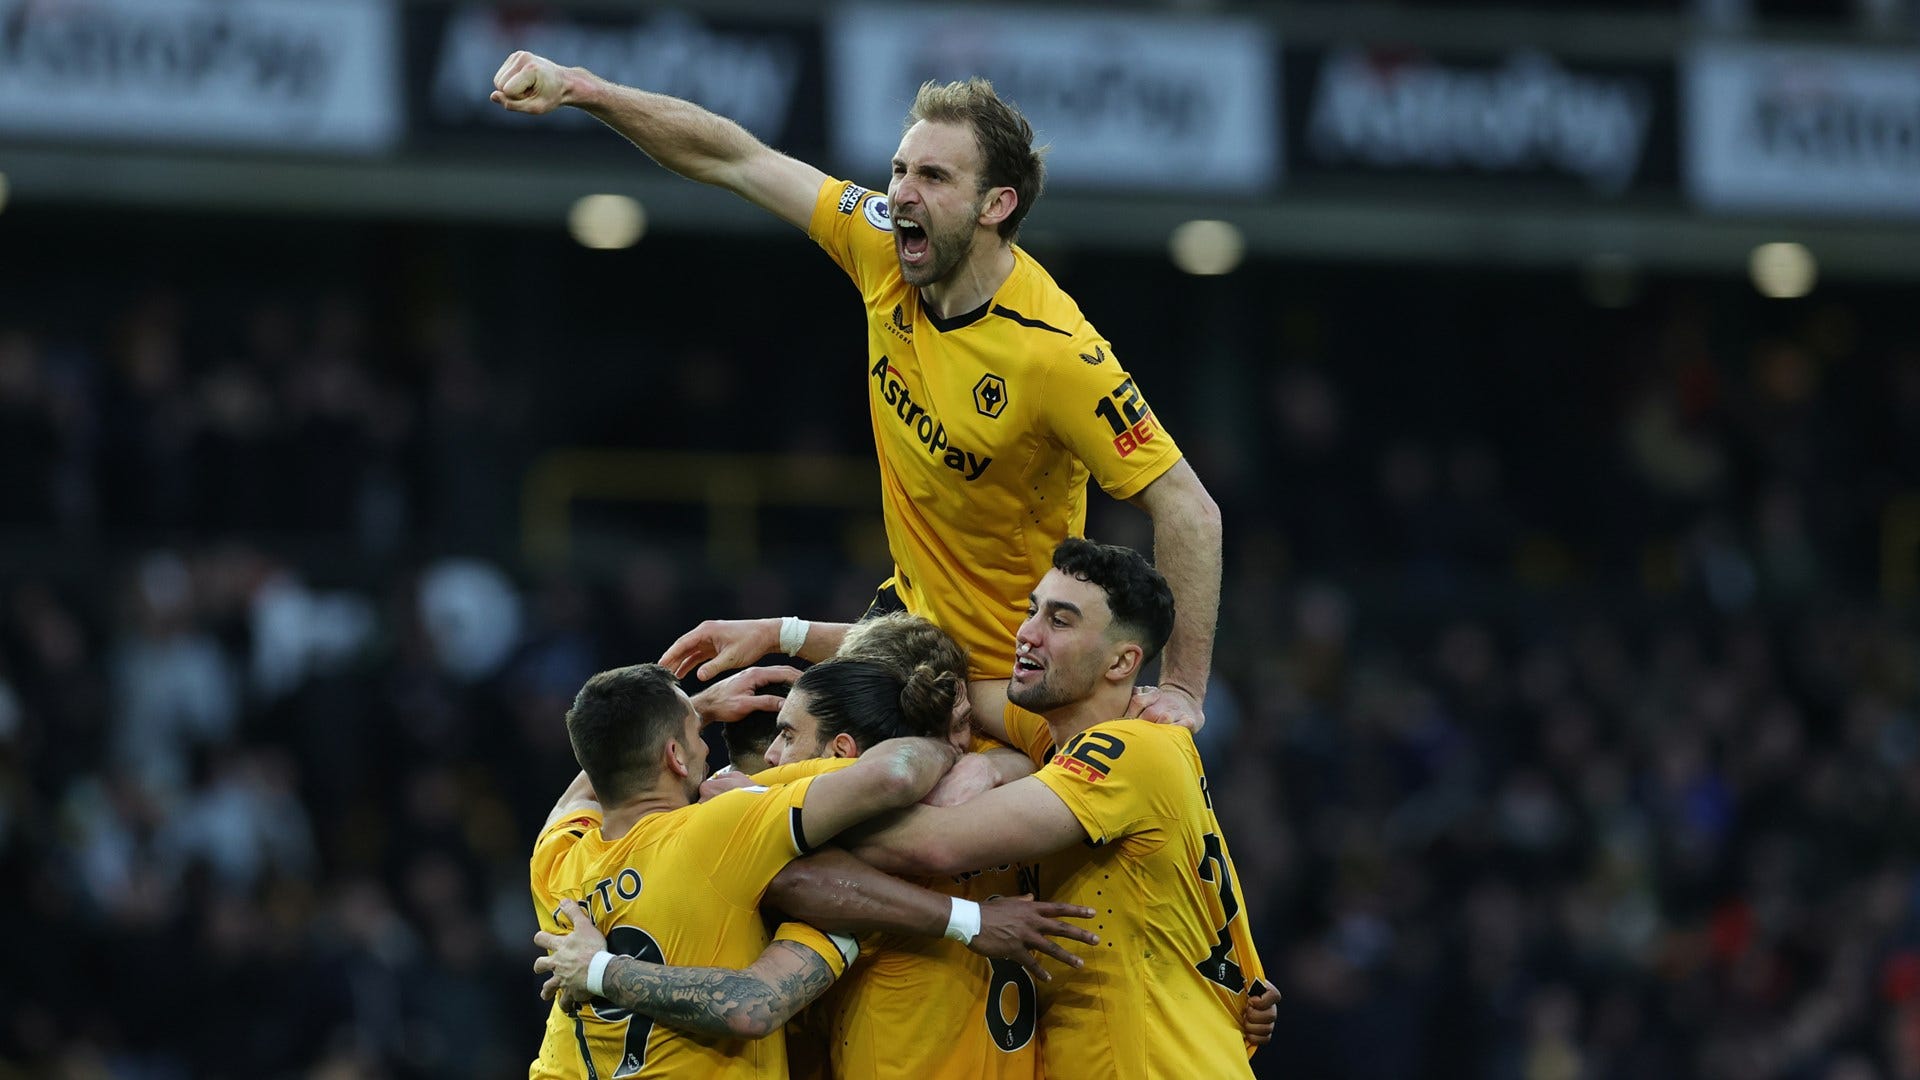 Wolves vs Leeds United Live stream, TV channel, kick-off time and where to watch Goal US